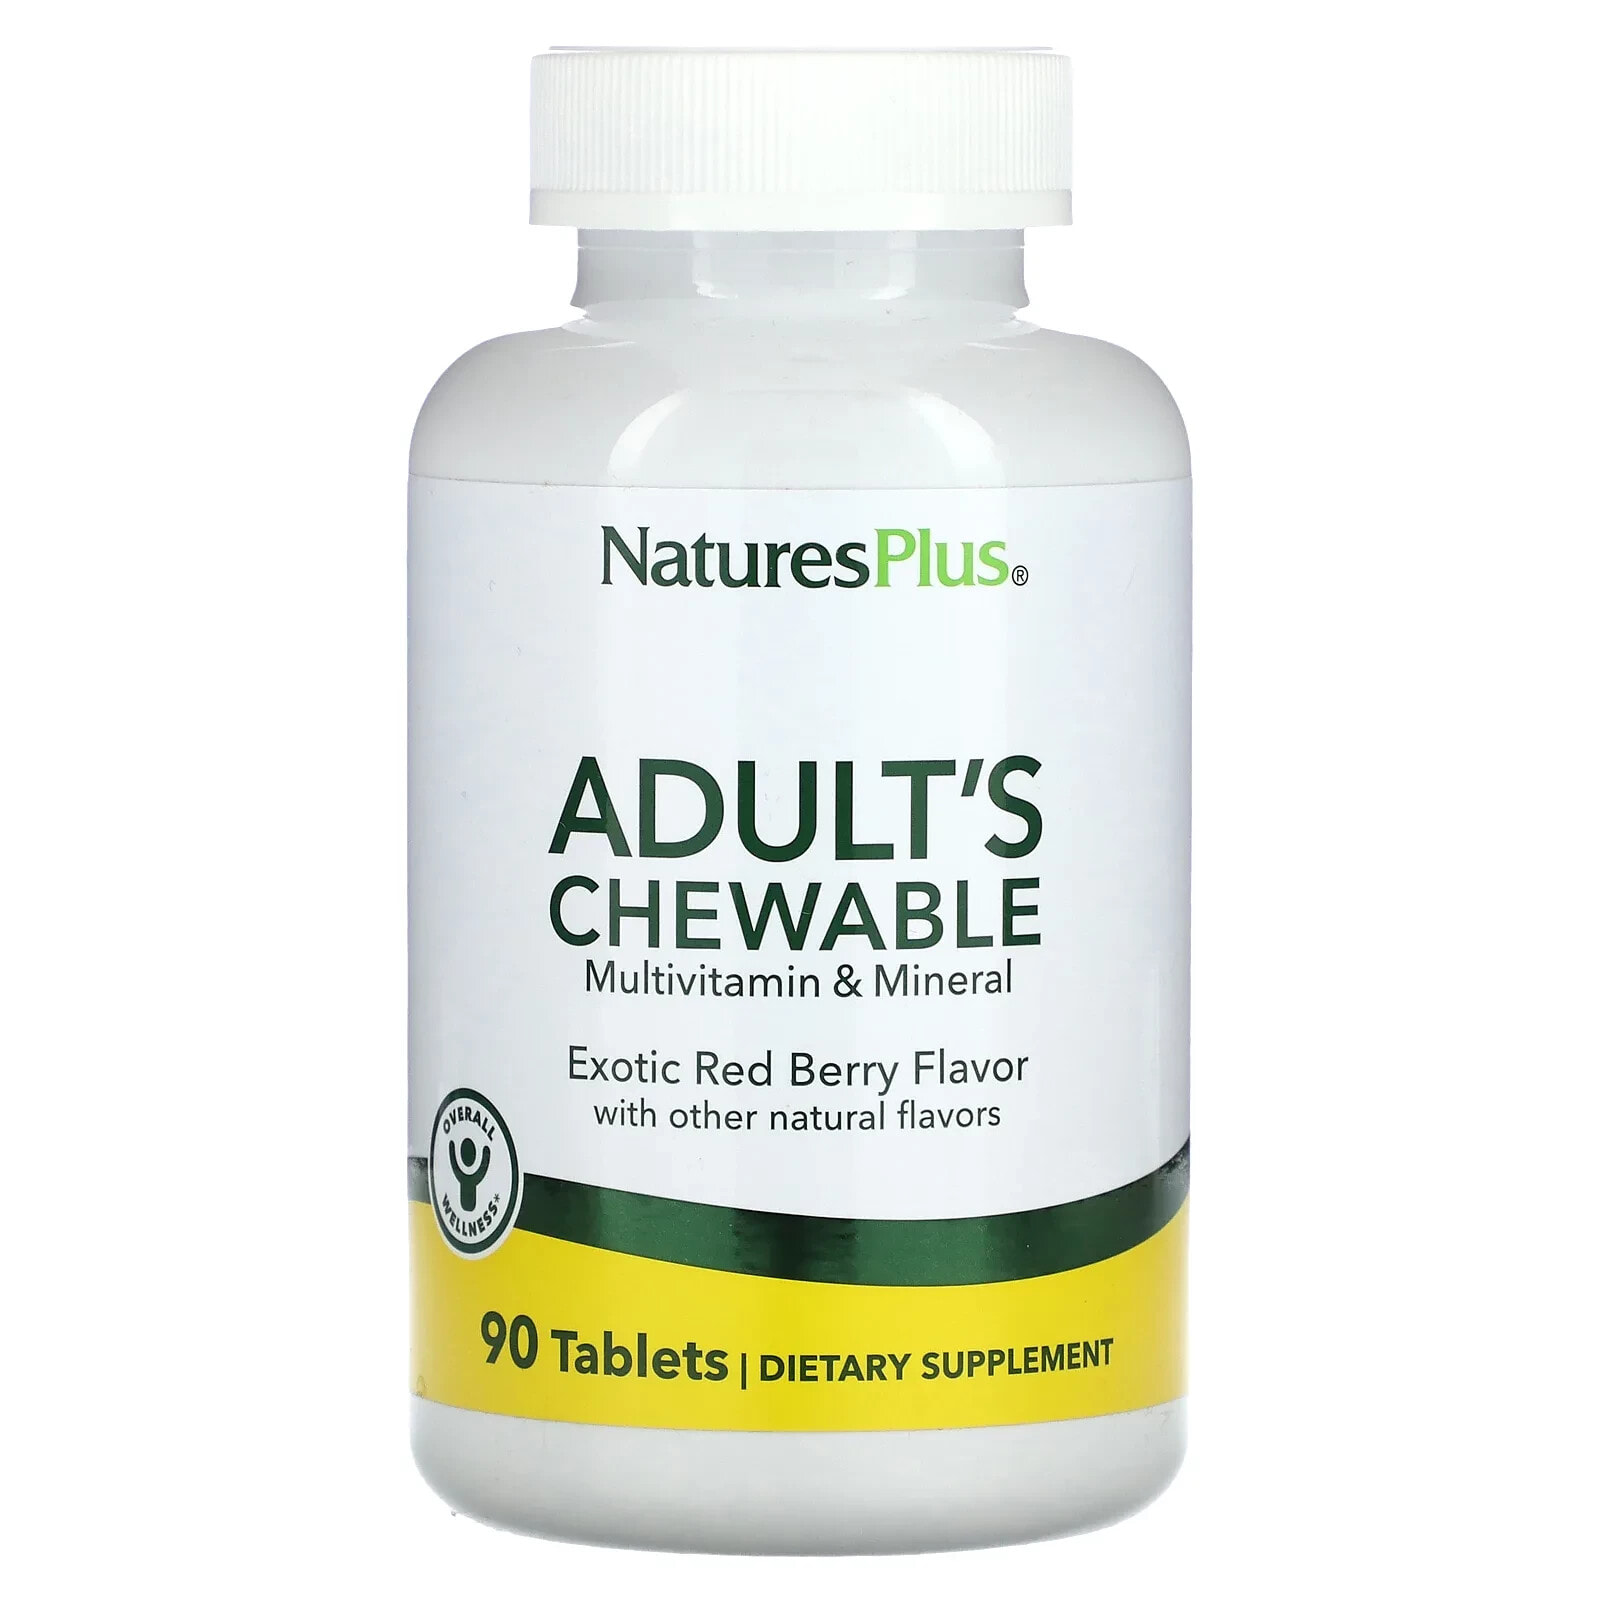 Adult's Chewable Multivitamin & Mineral, Exotic Red Berry, 90 Tablets